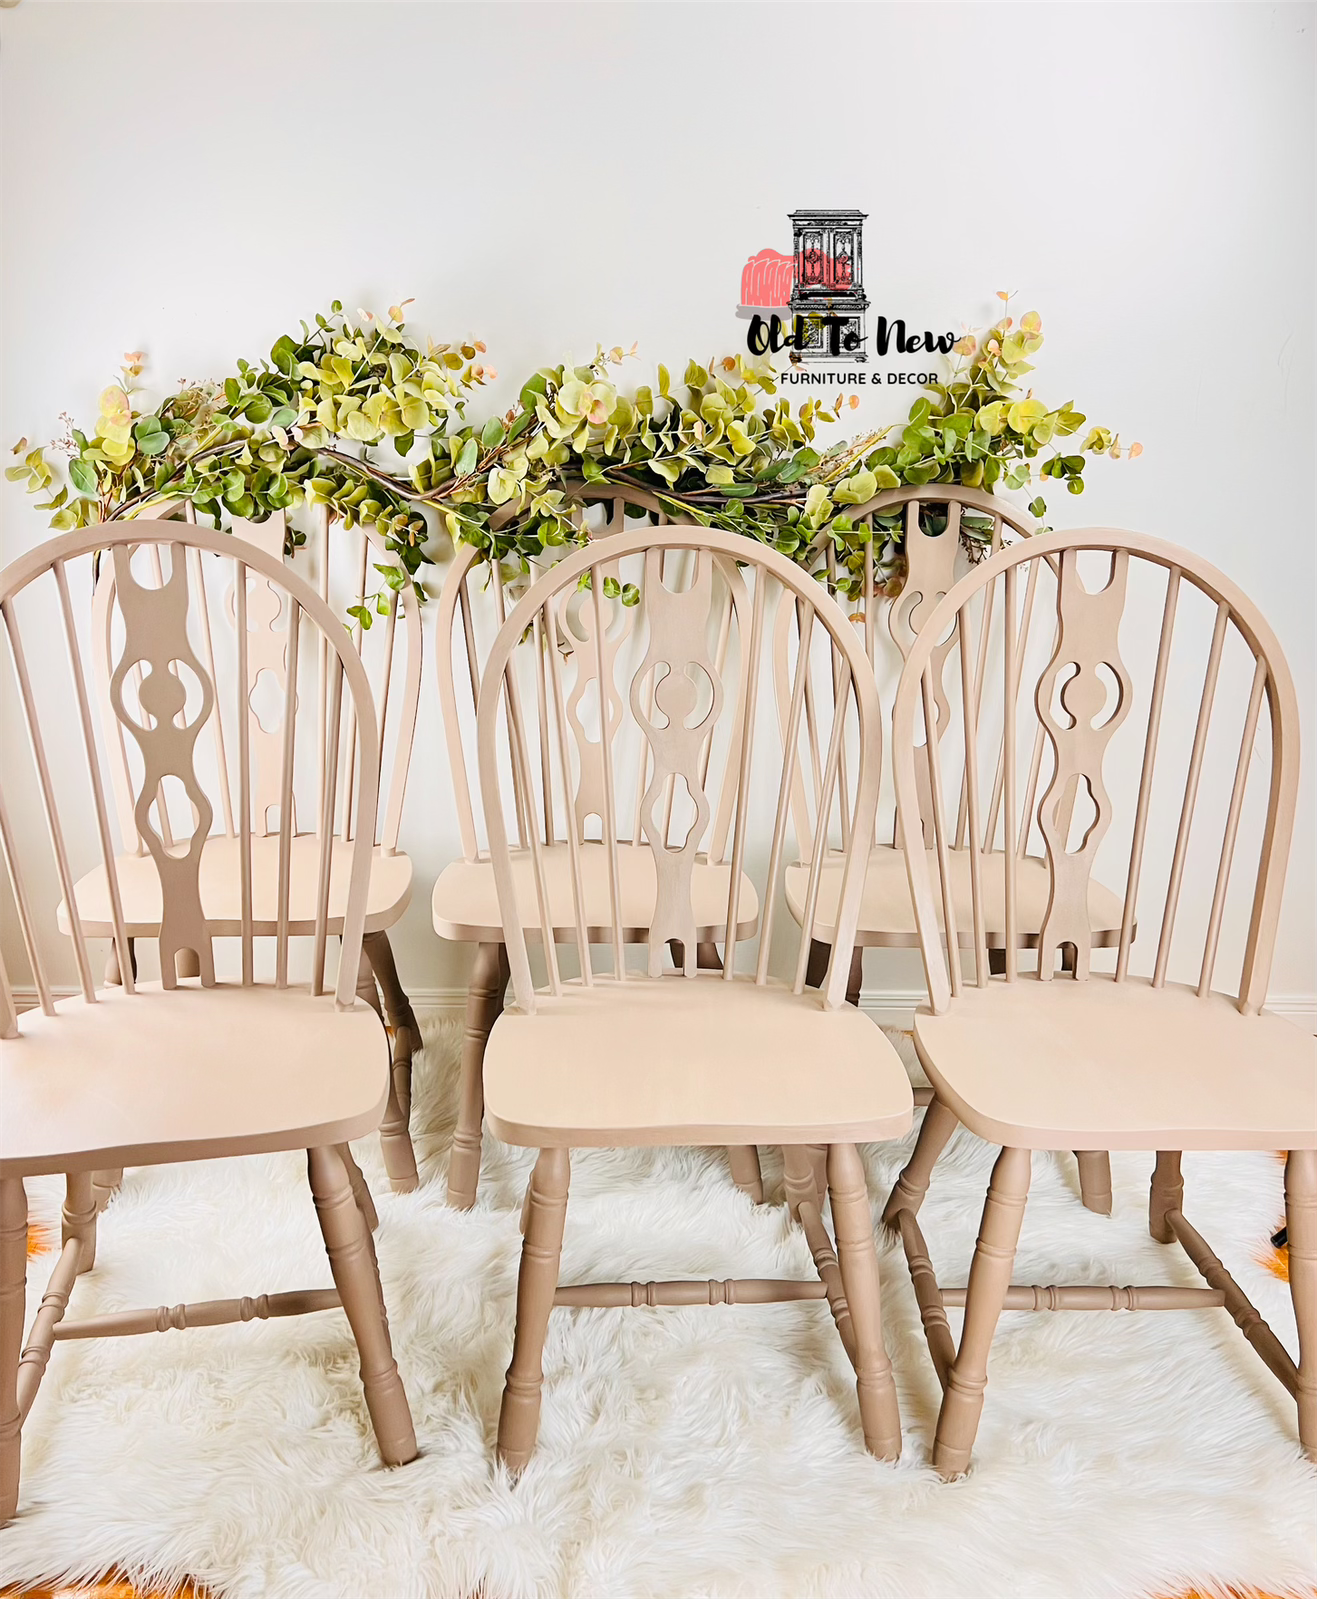 Chalk Painted Wooden Chairs Painted Modern Farmhouse Tan Color by Old To New Furniture 